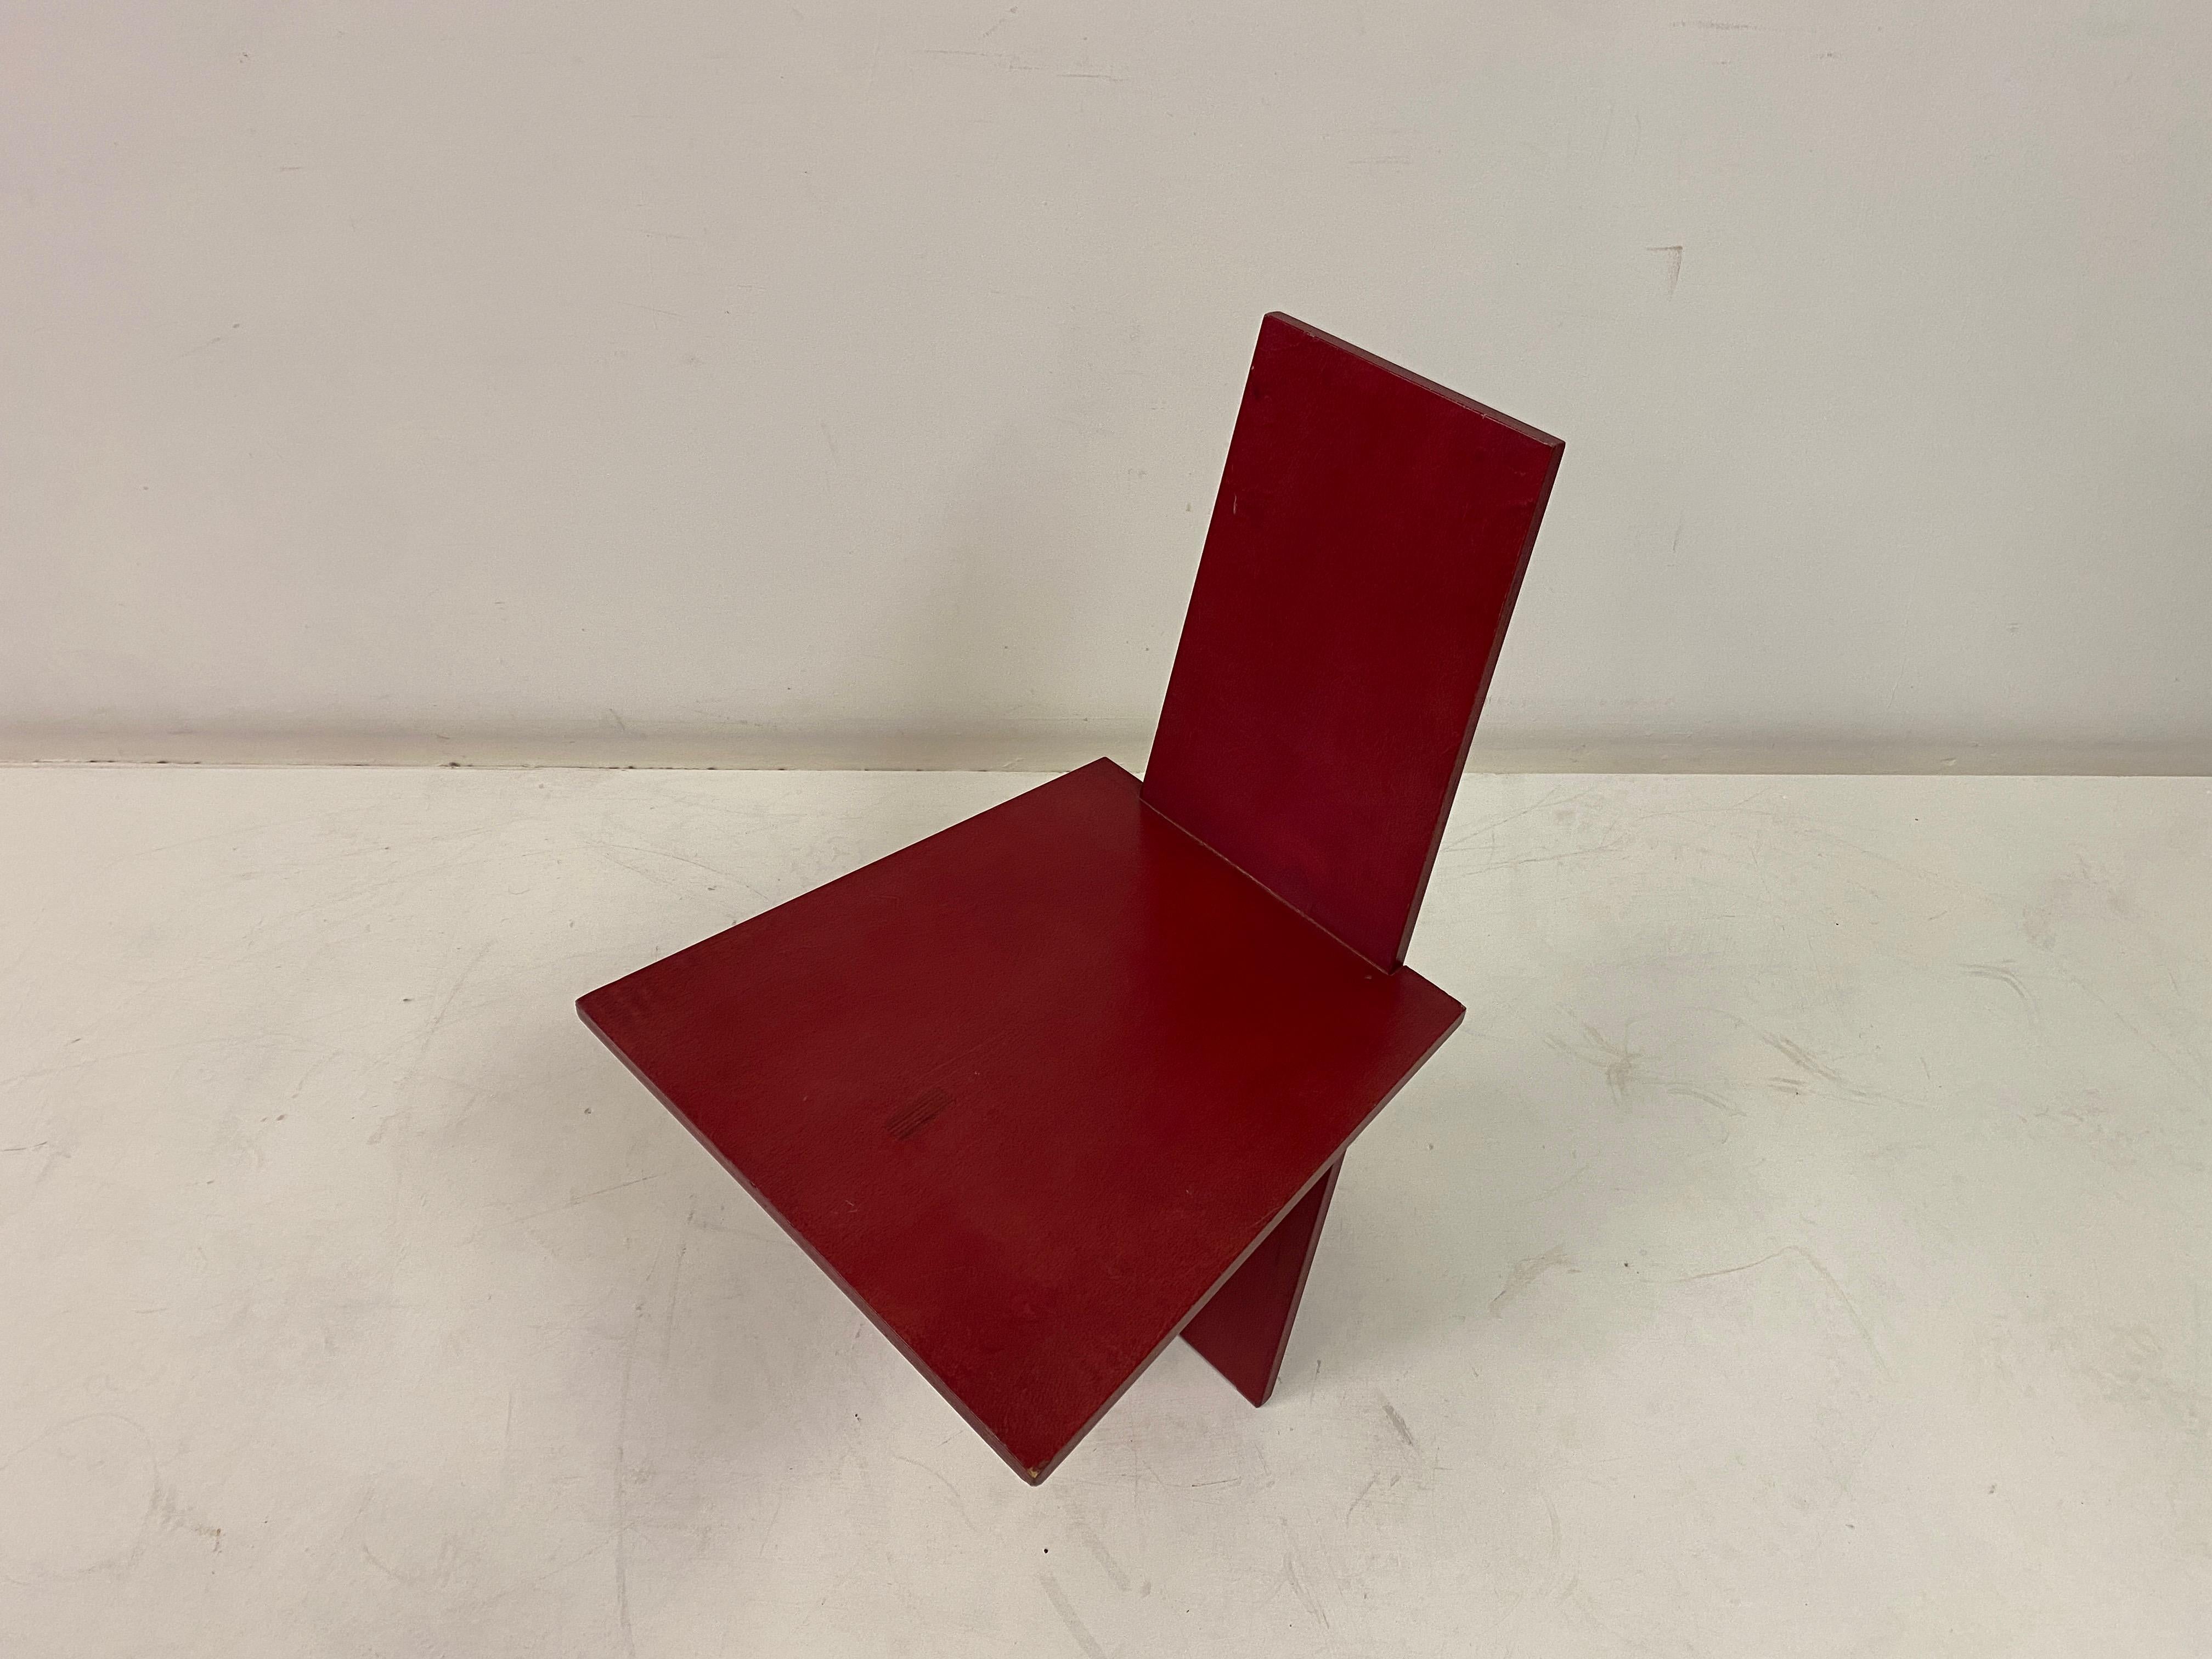 1980s Red Modernist Plywood Chair In Good Condition For Sale In London, London